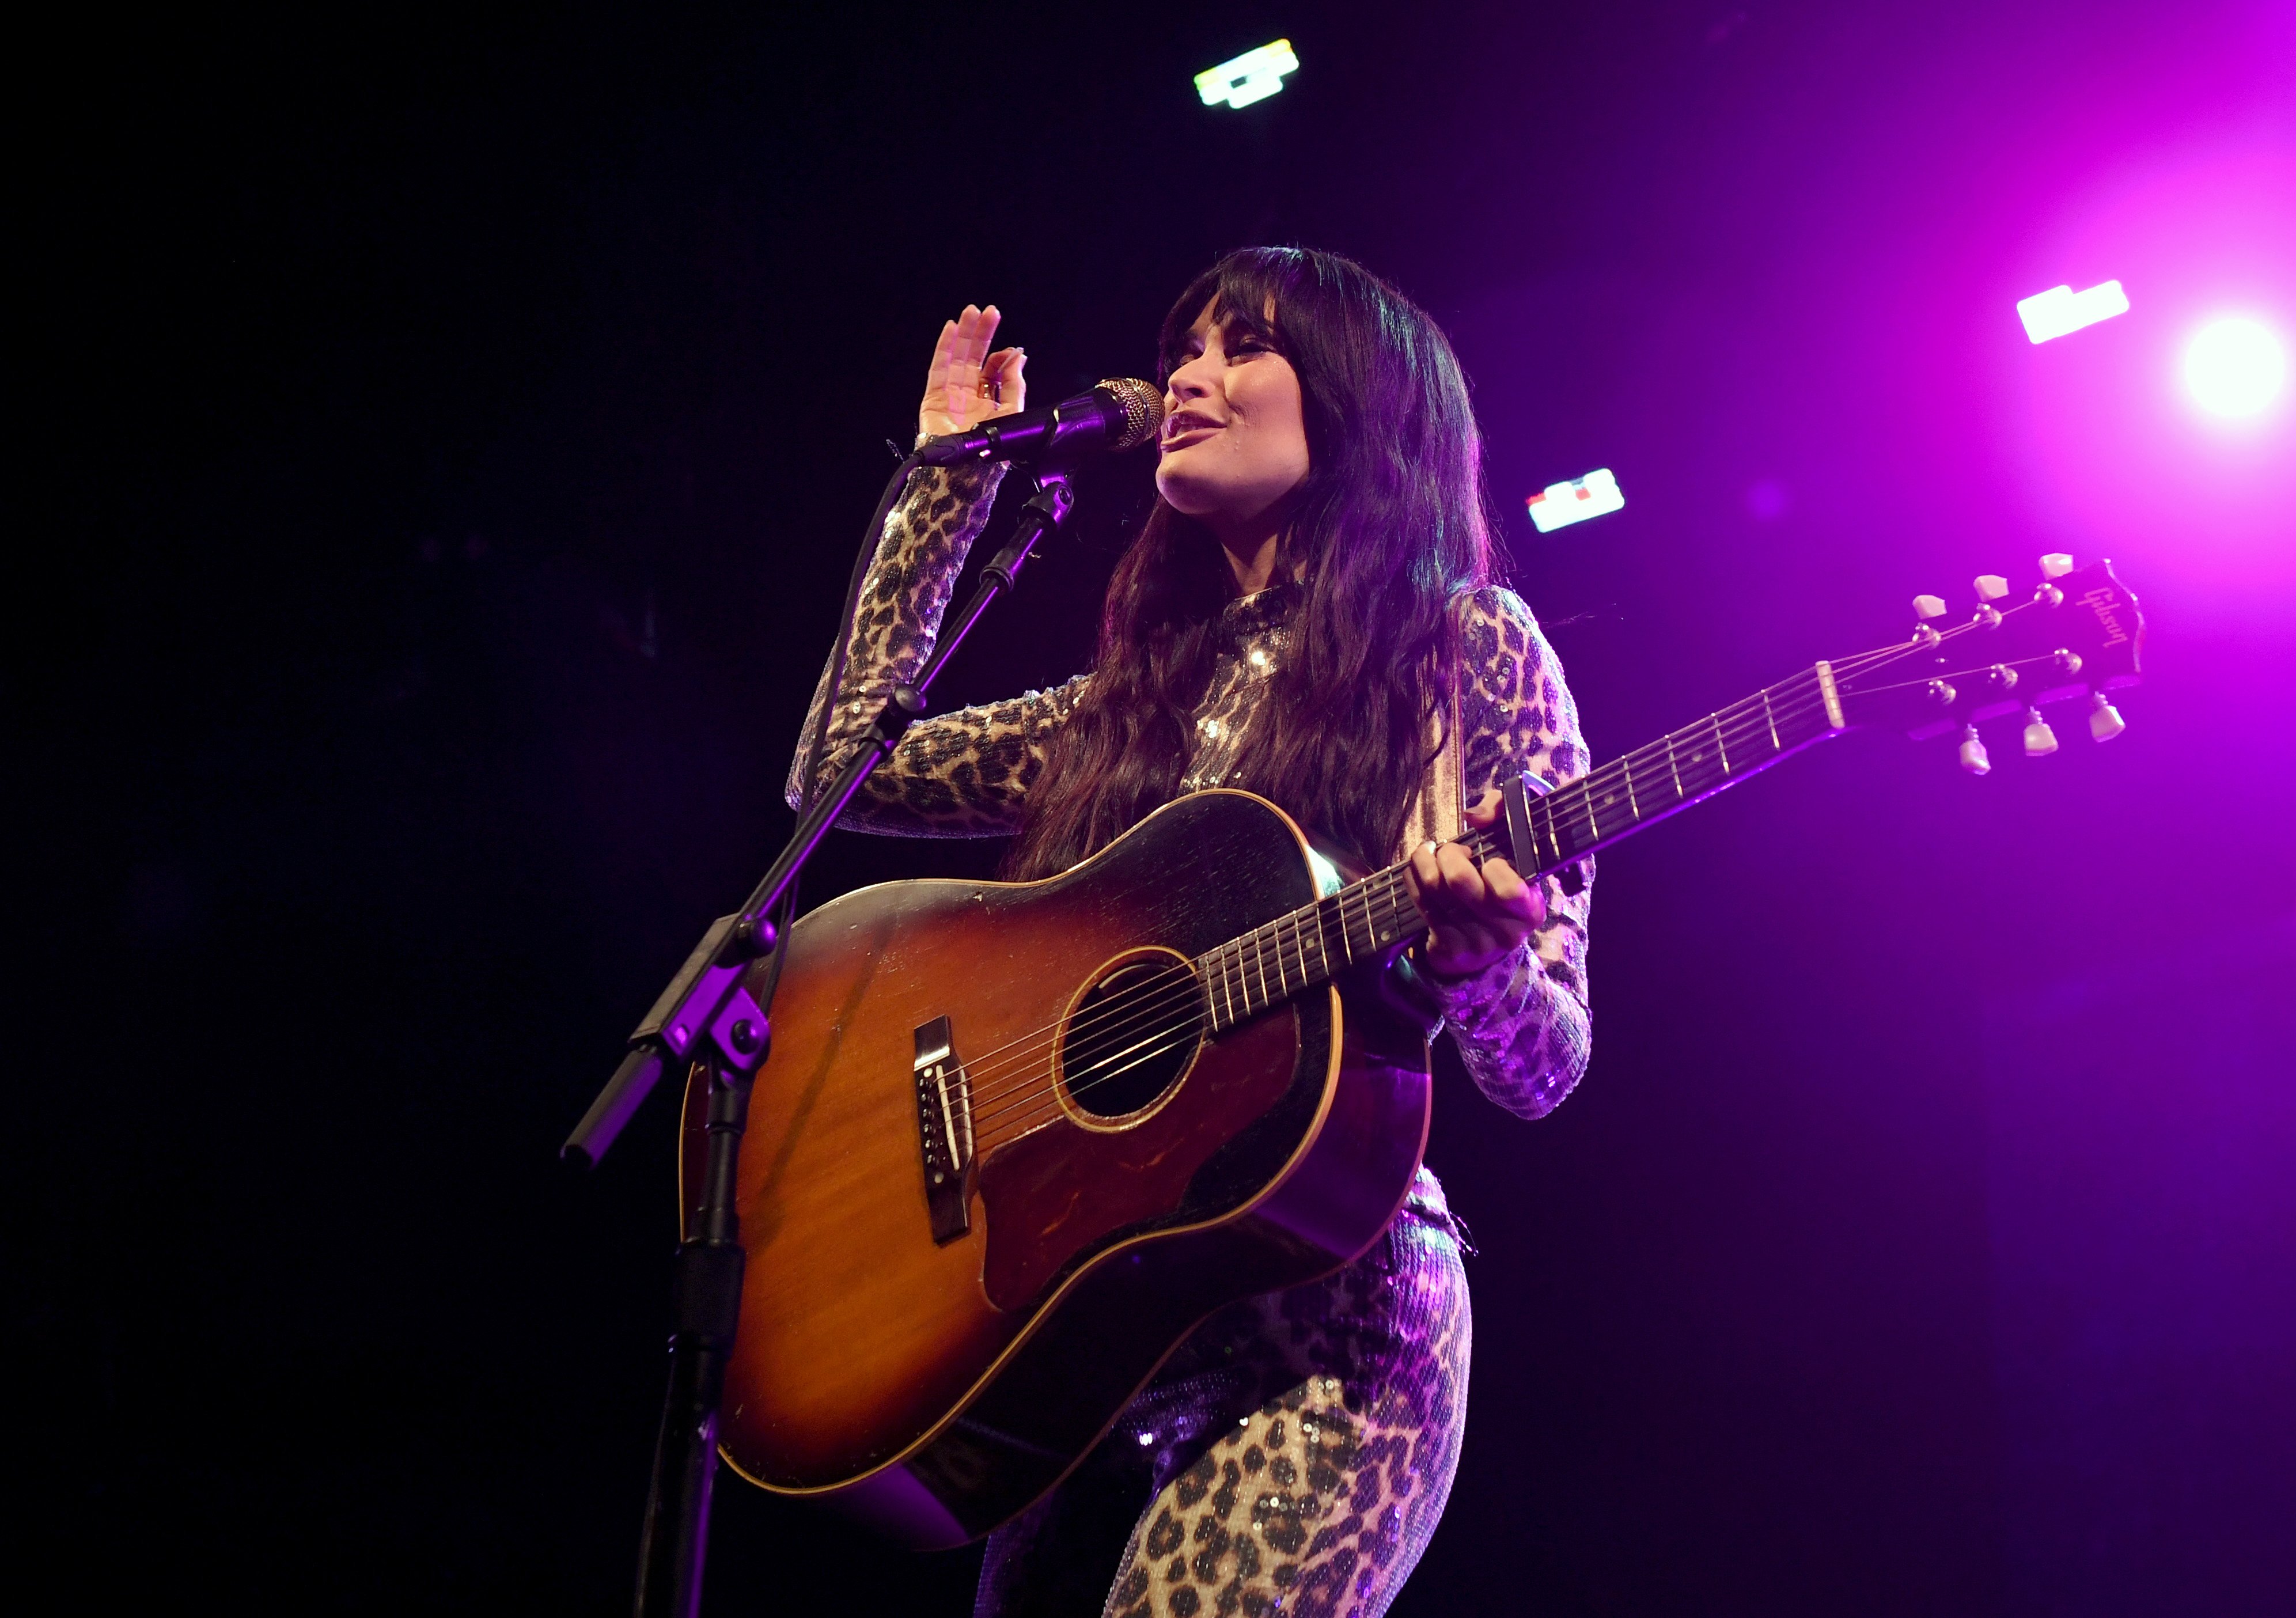 Recording artist Kacey Musgraves performs at the Intersect music festival at the Las Vegas Festival Grounds